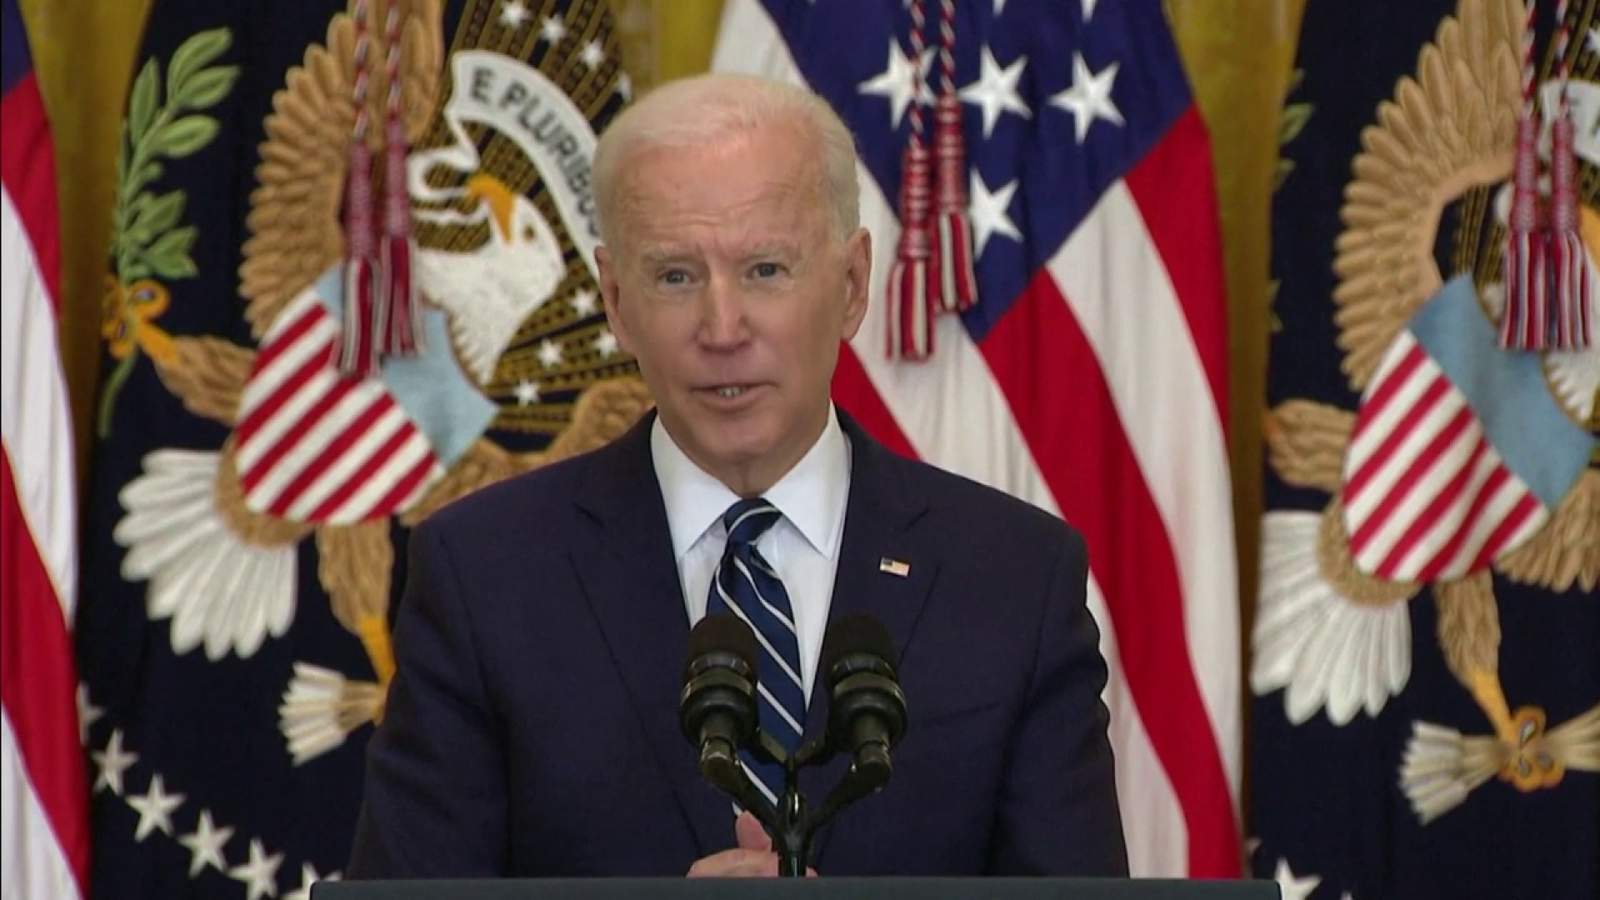 Here is what Biden said during his 1st official news conference